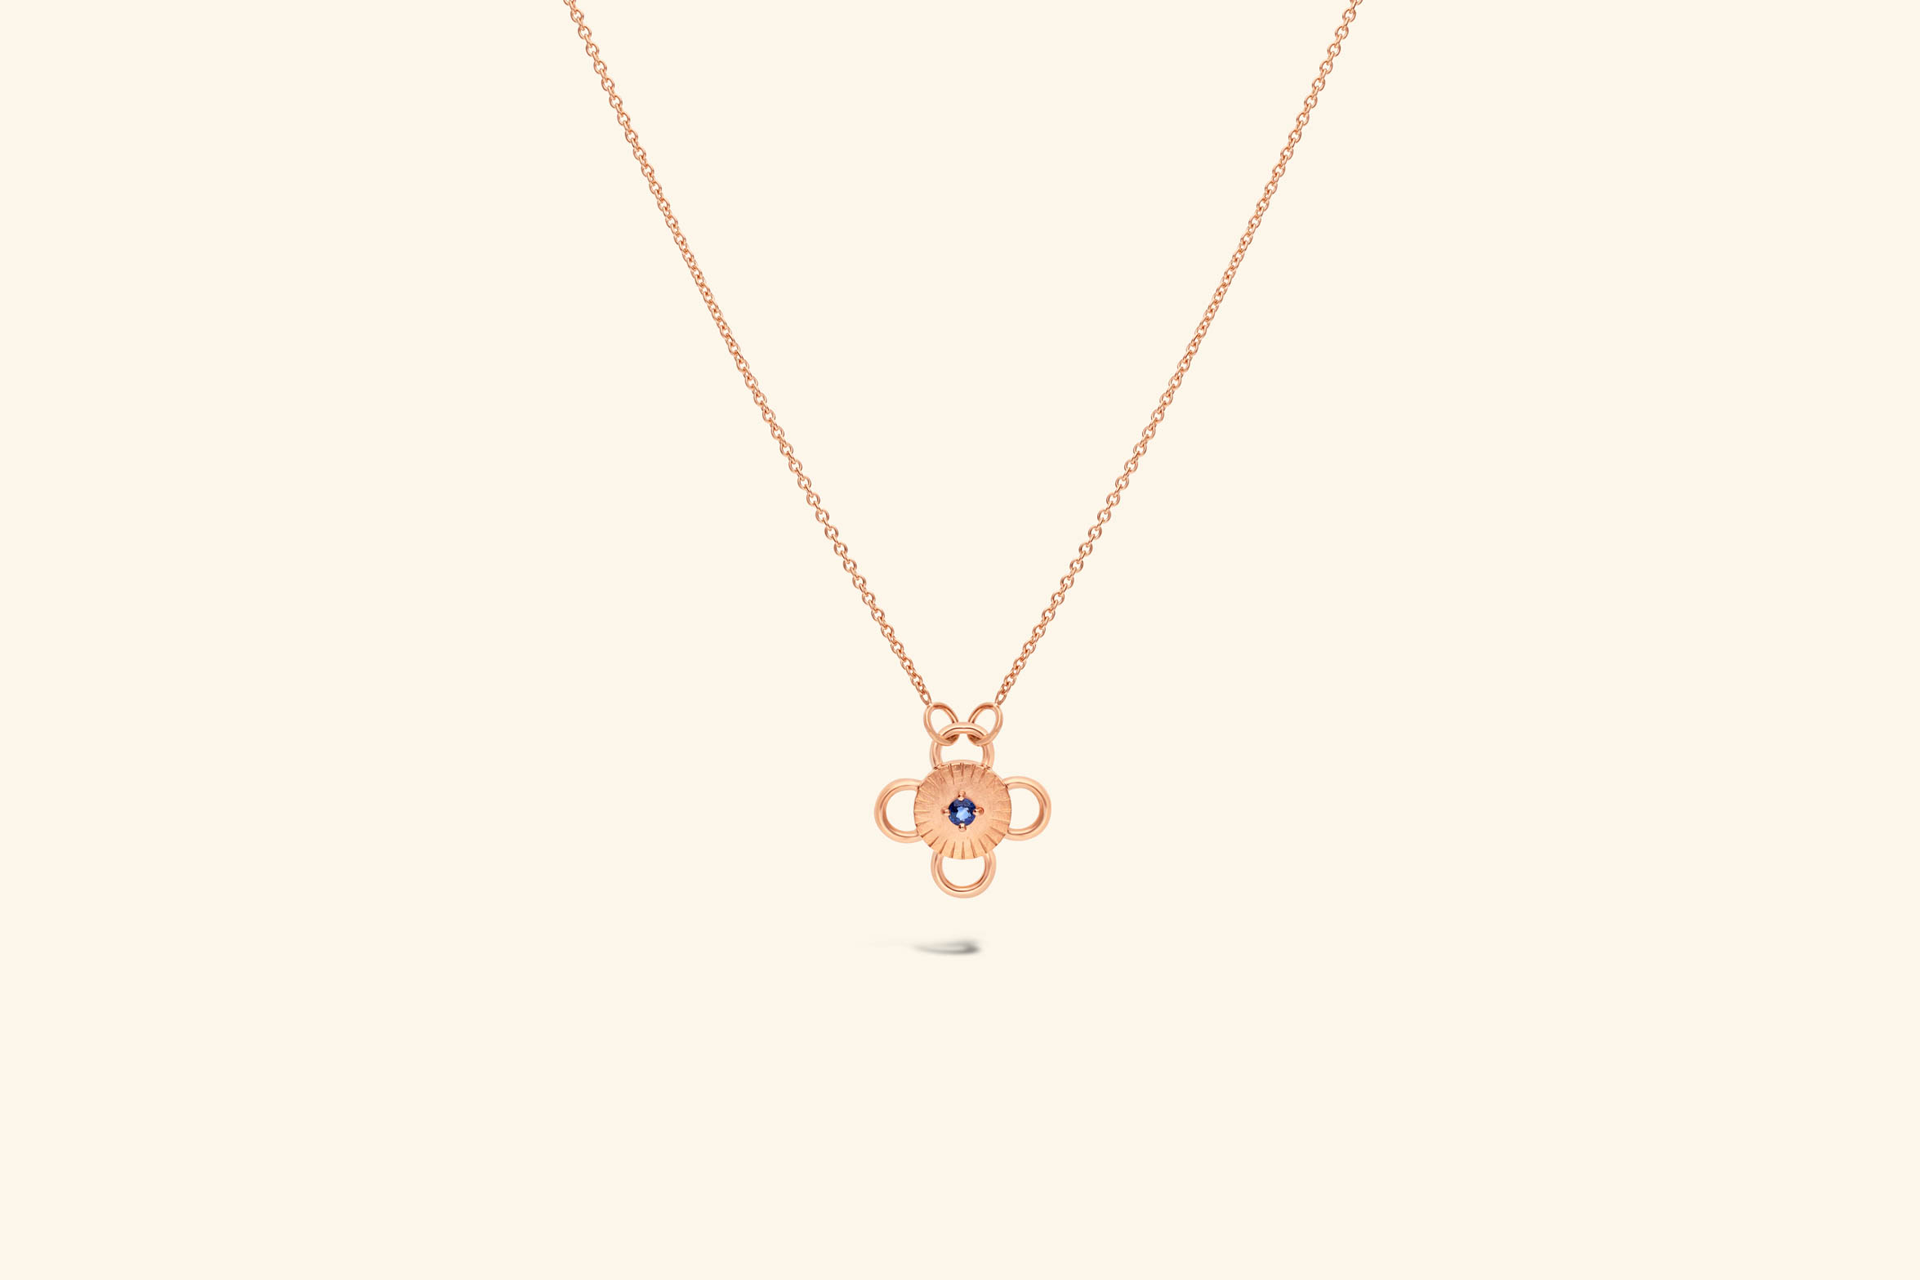 Necklace Baby Bolt, rose gold, set with a round aquamarine